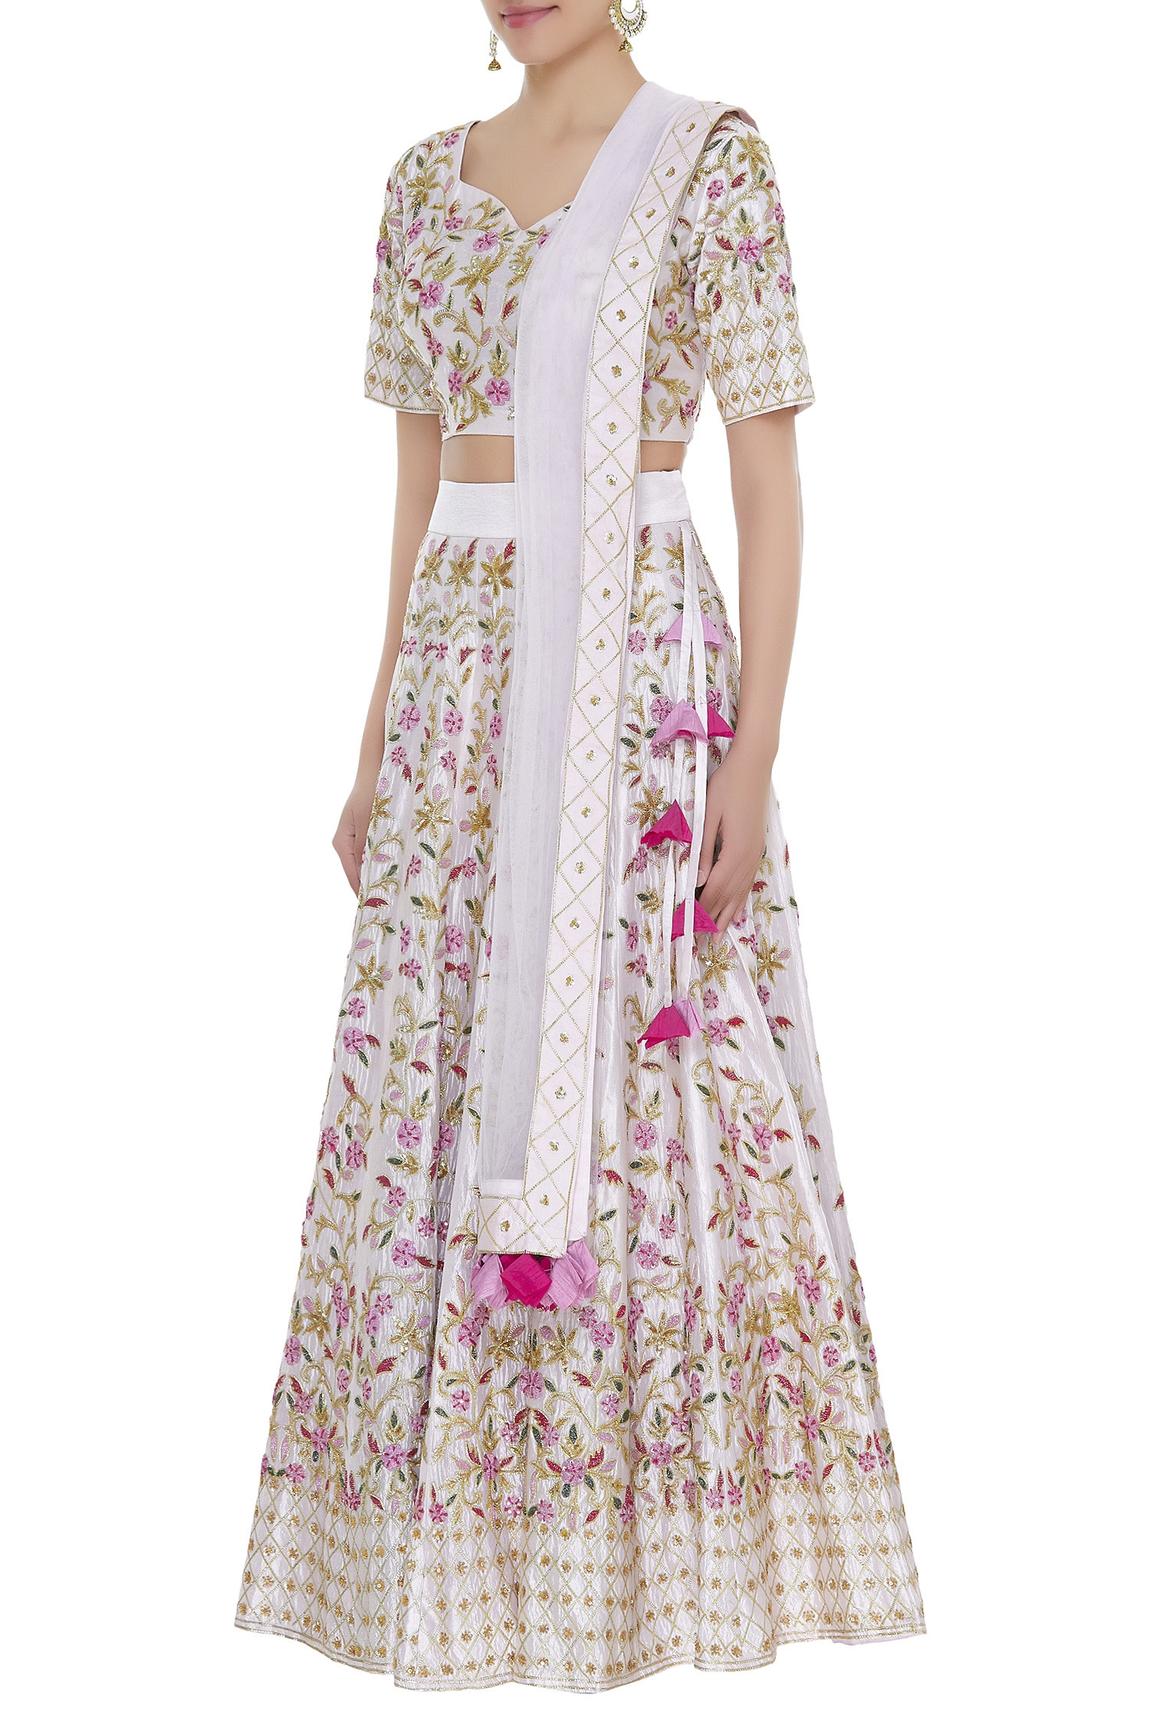 Off White Embroidered Lehenga With Blouse And Dupatta